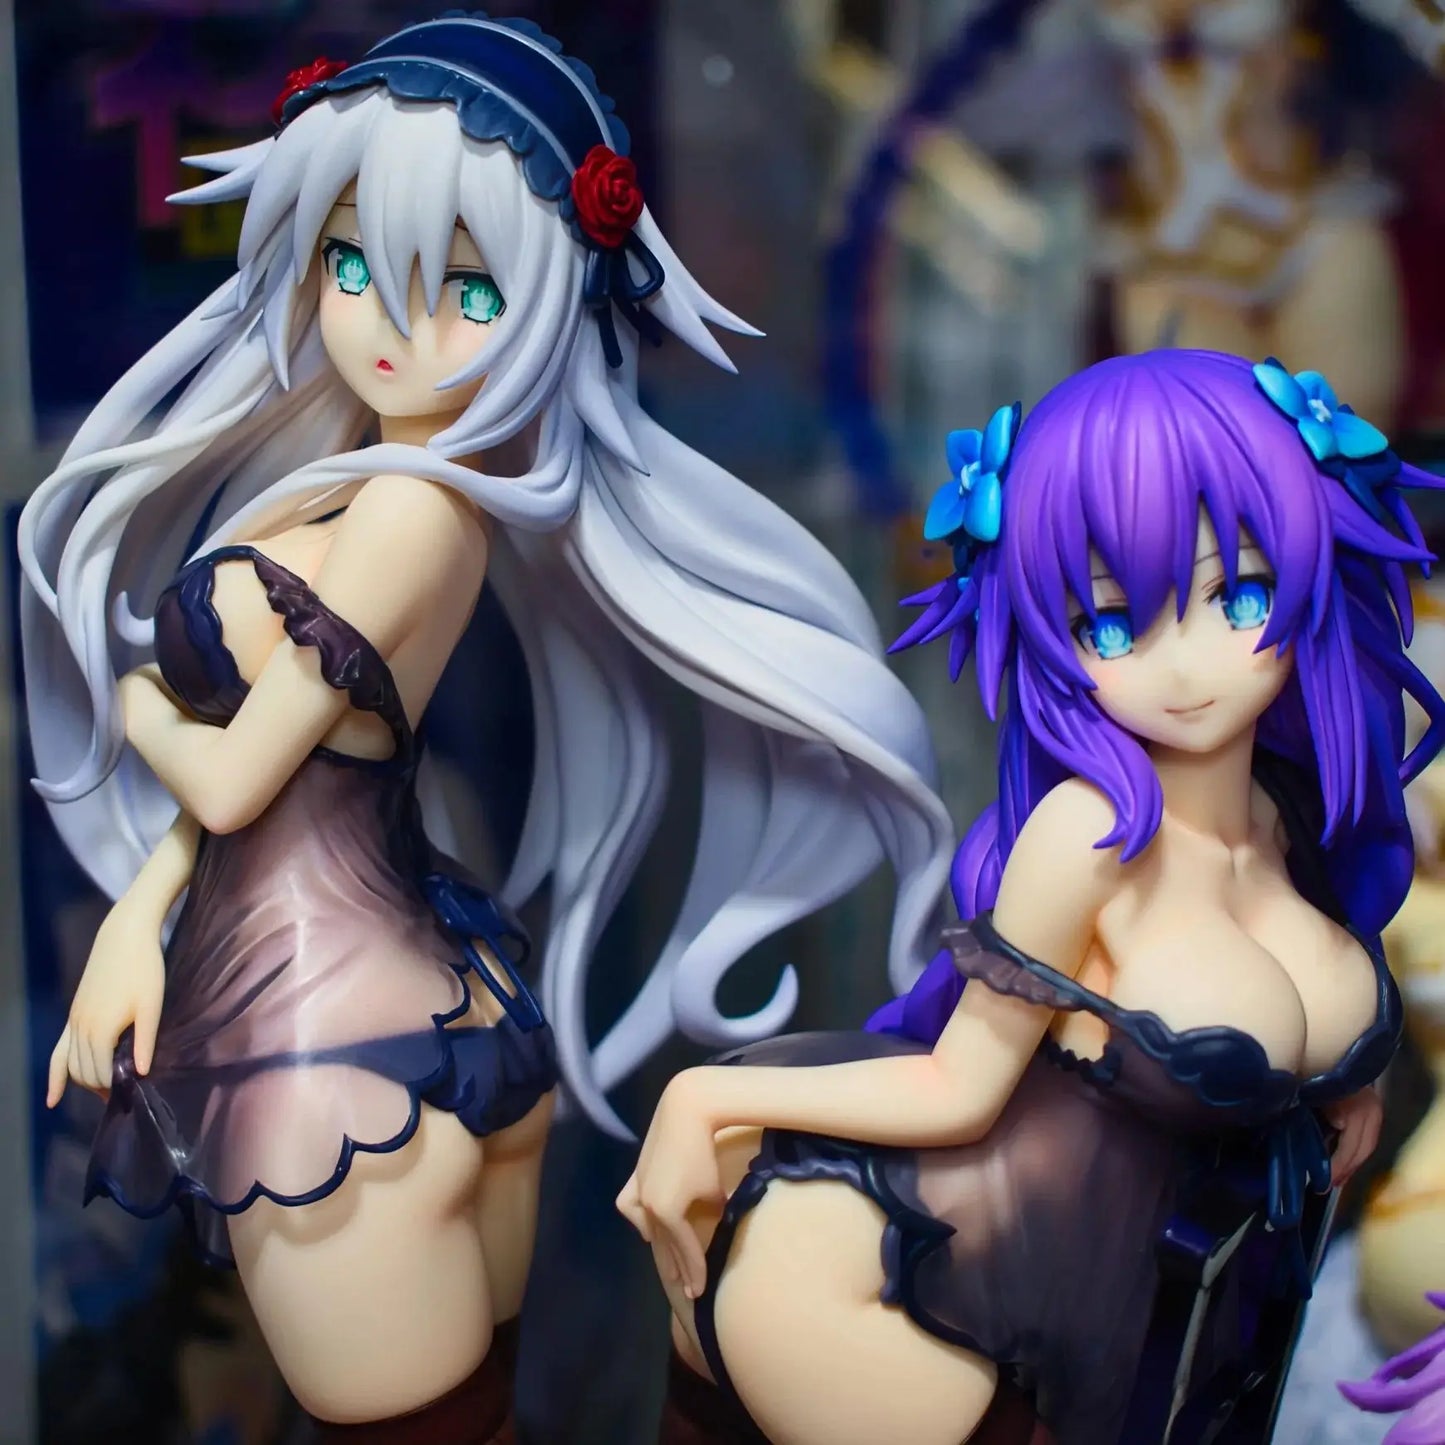 24cm NSFW Choujigen Game Neptune Black Heart Sexy Girl Baby Doll ver PVC Action Figure Toy Adult Collection Model Doll Gifts、